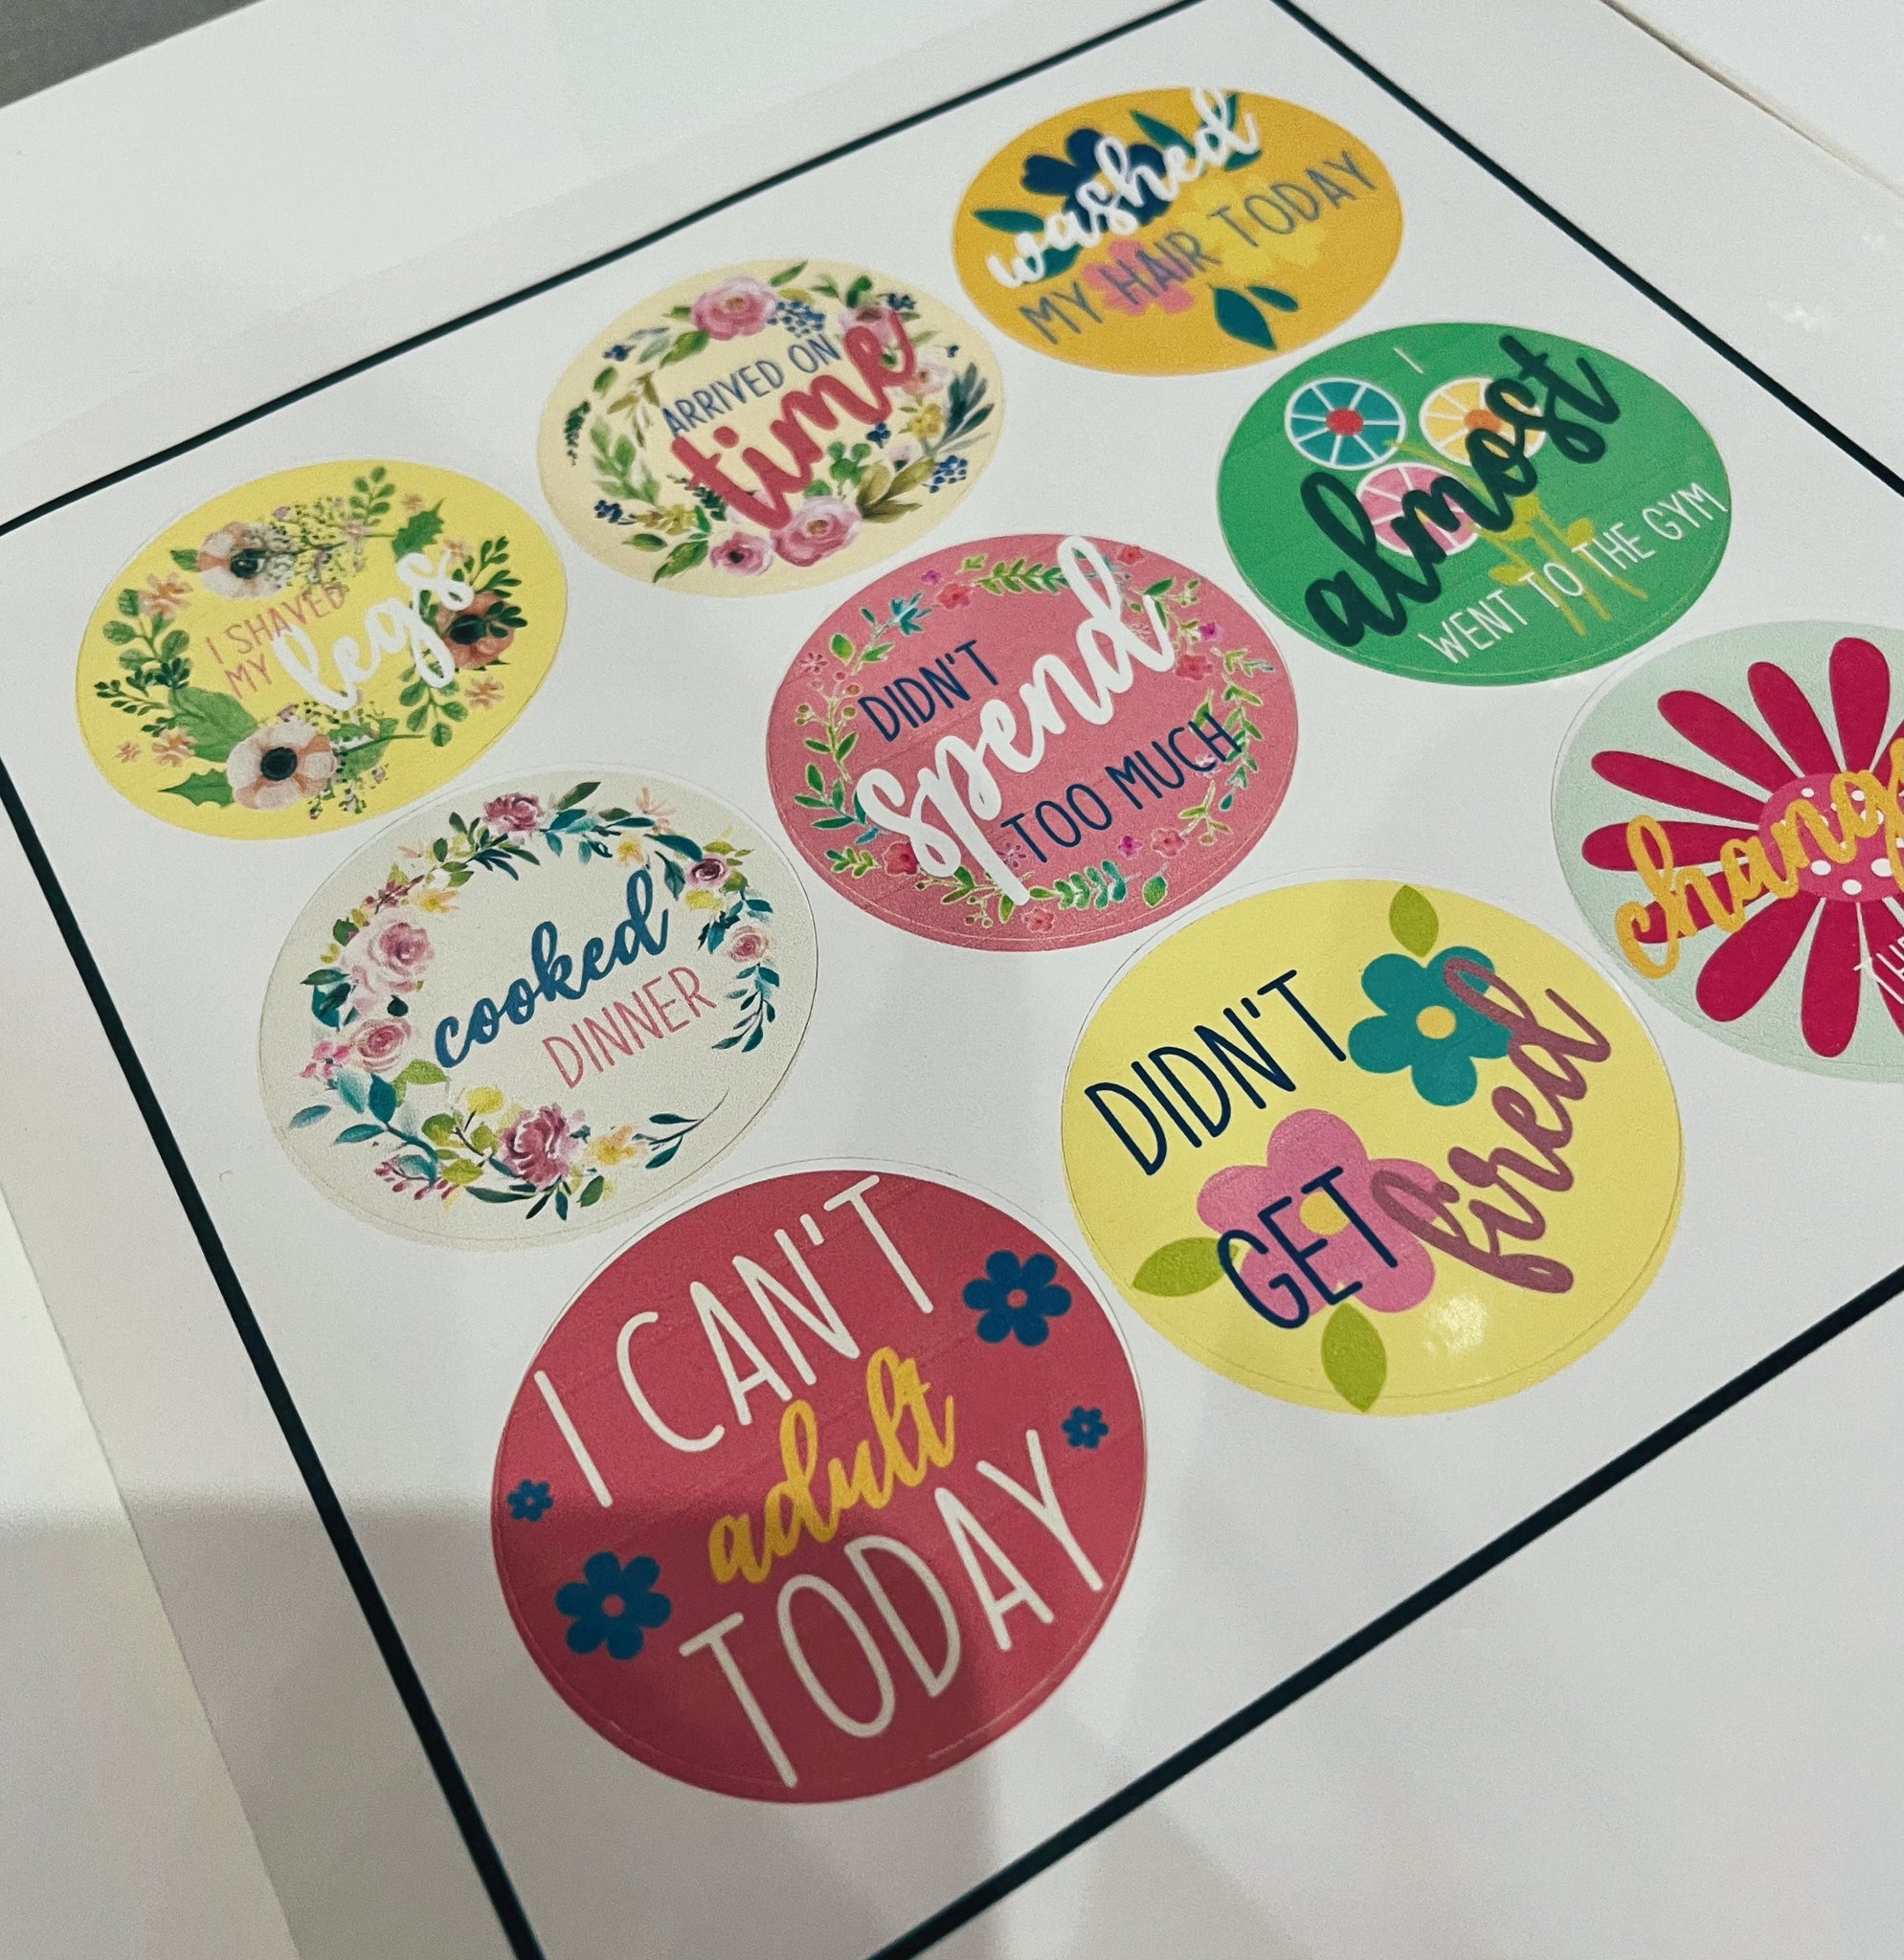 i cant adult today fun stickers 9 per sheet fashionably pregnant gift fun parenting is hard mum new mum mum goals meme free delivery i almost went to the gym today gloss grown up parent stickers mothers day baby shower 